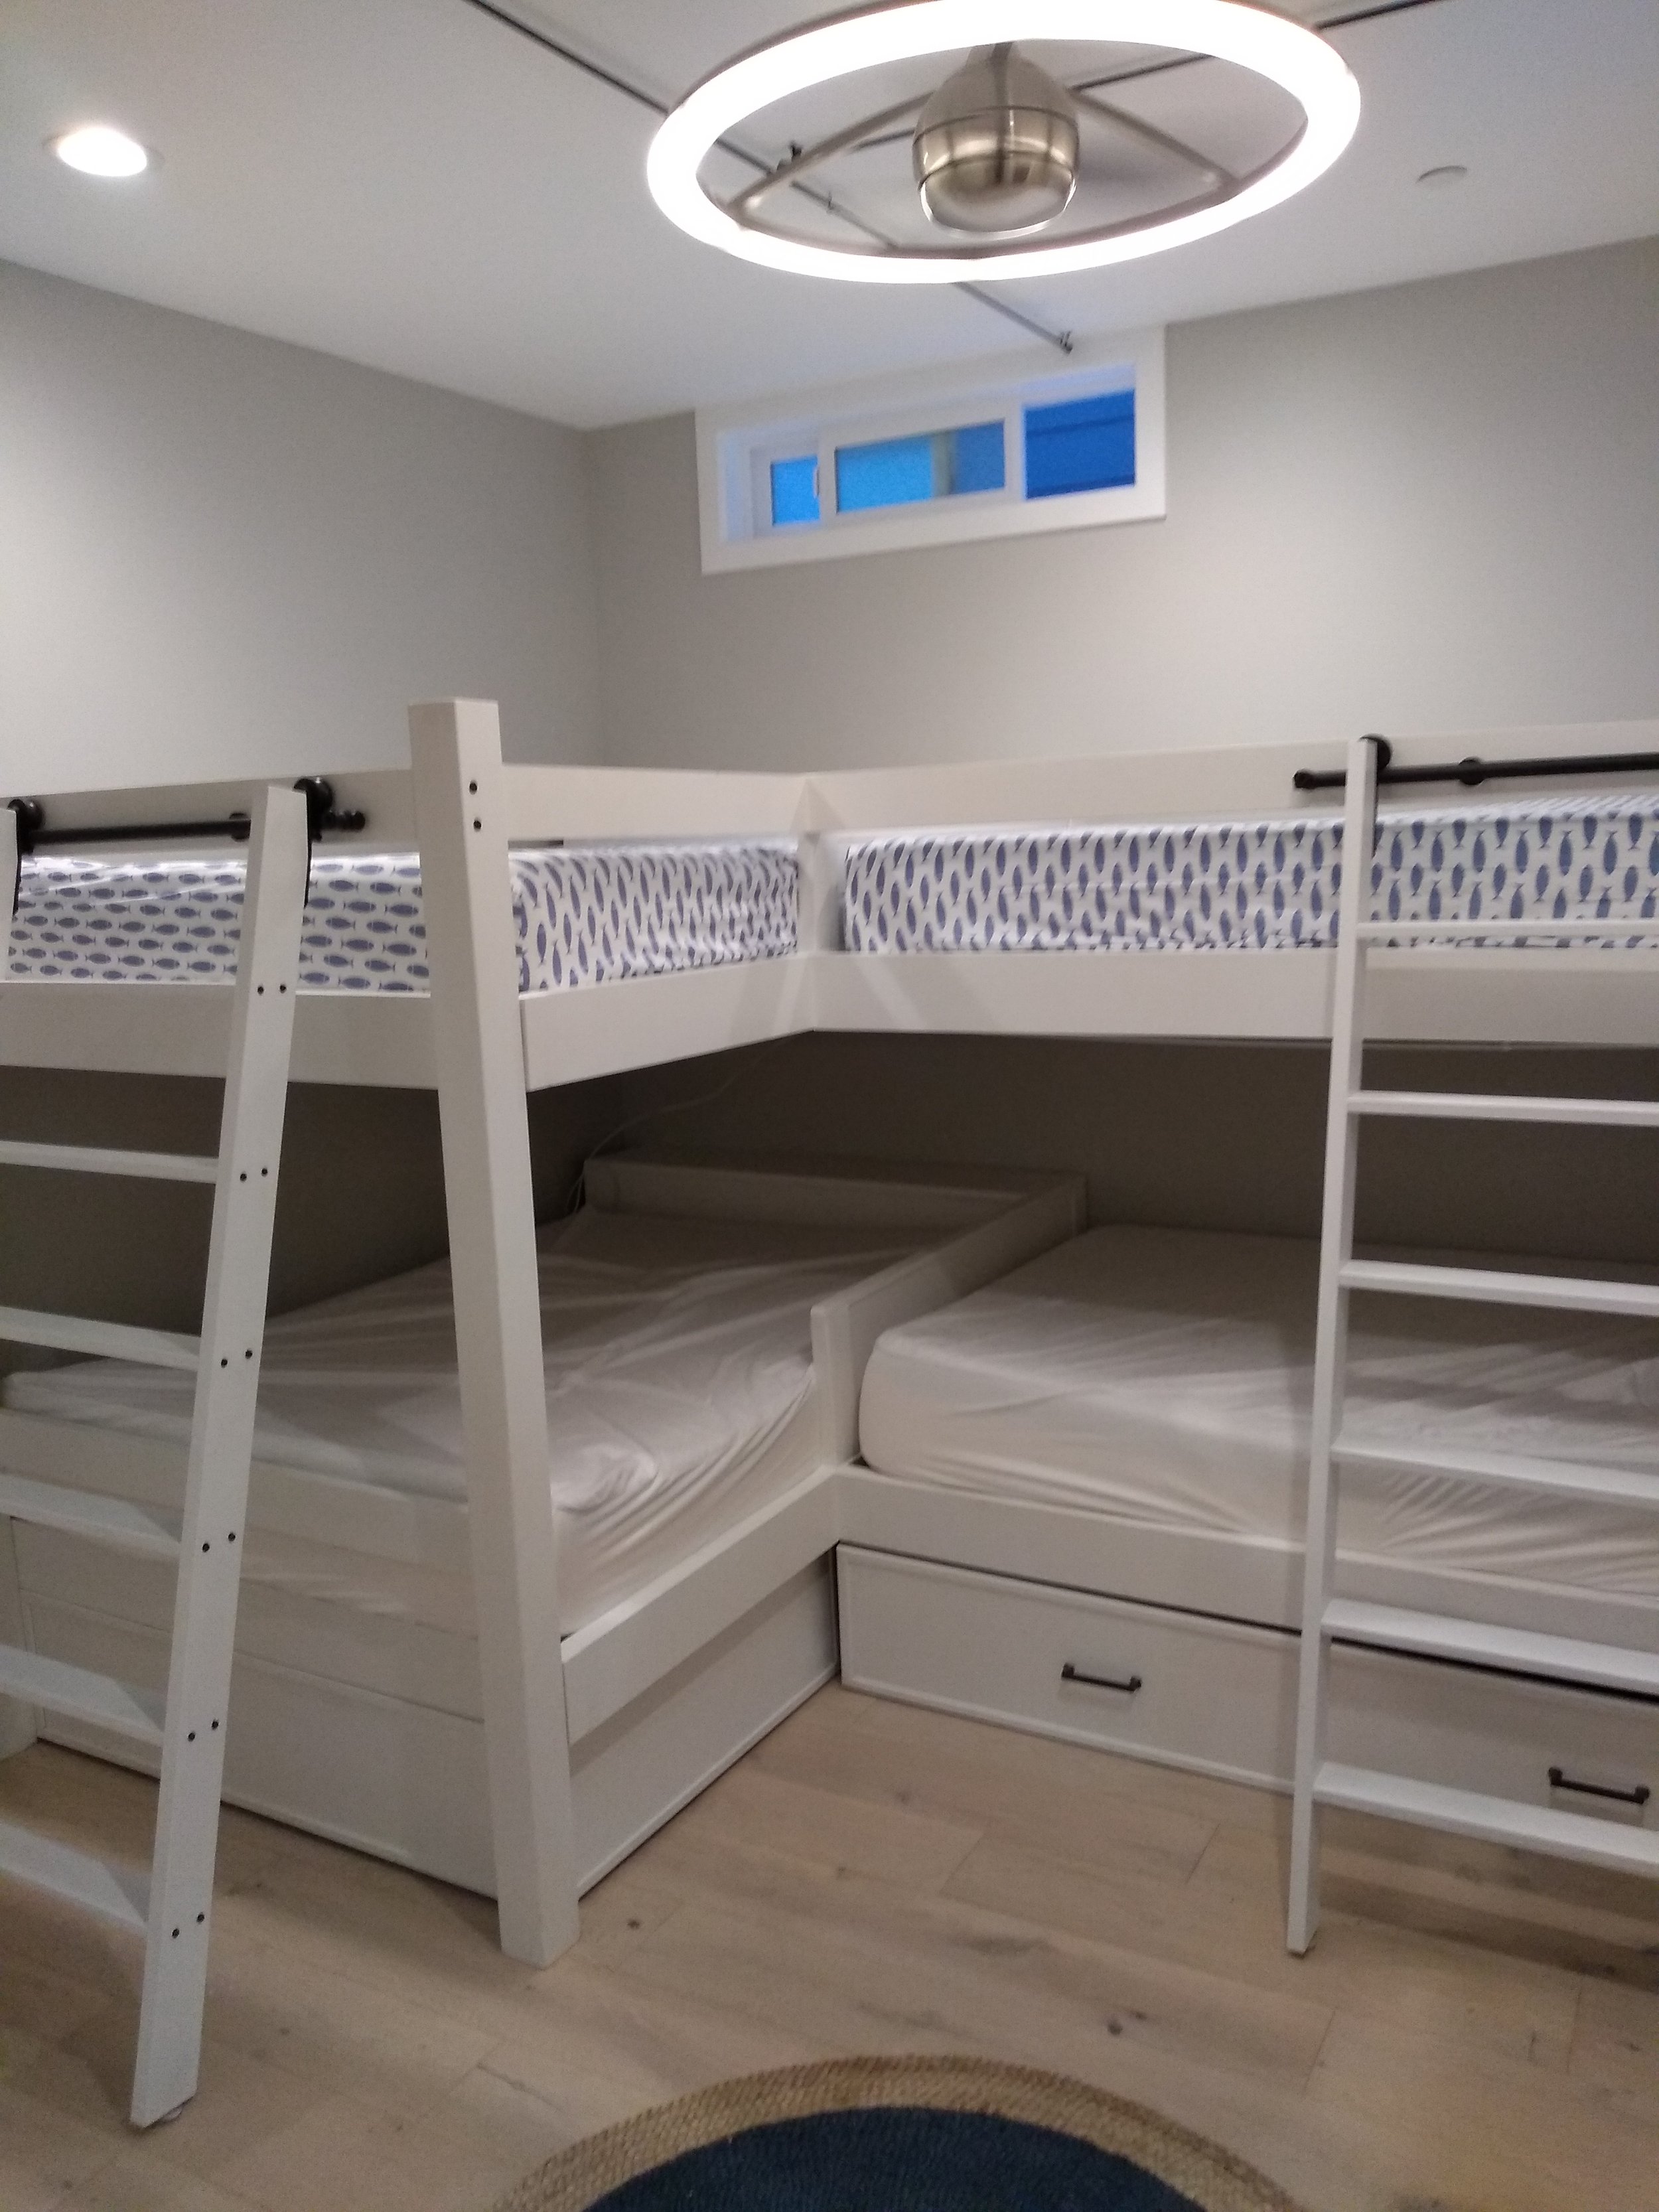 dueling bunk beds